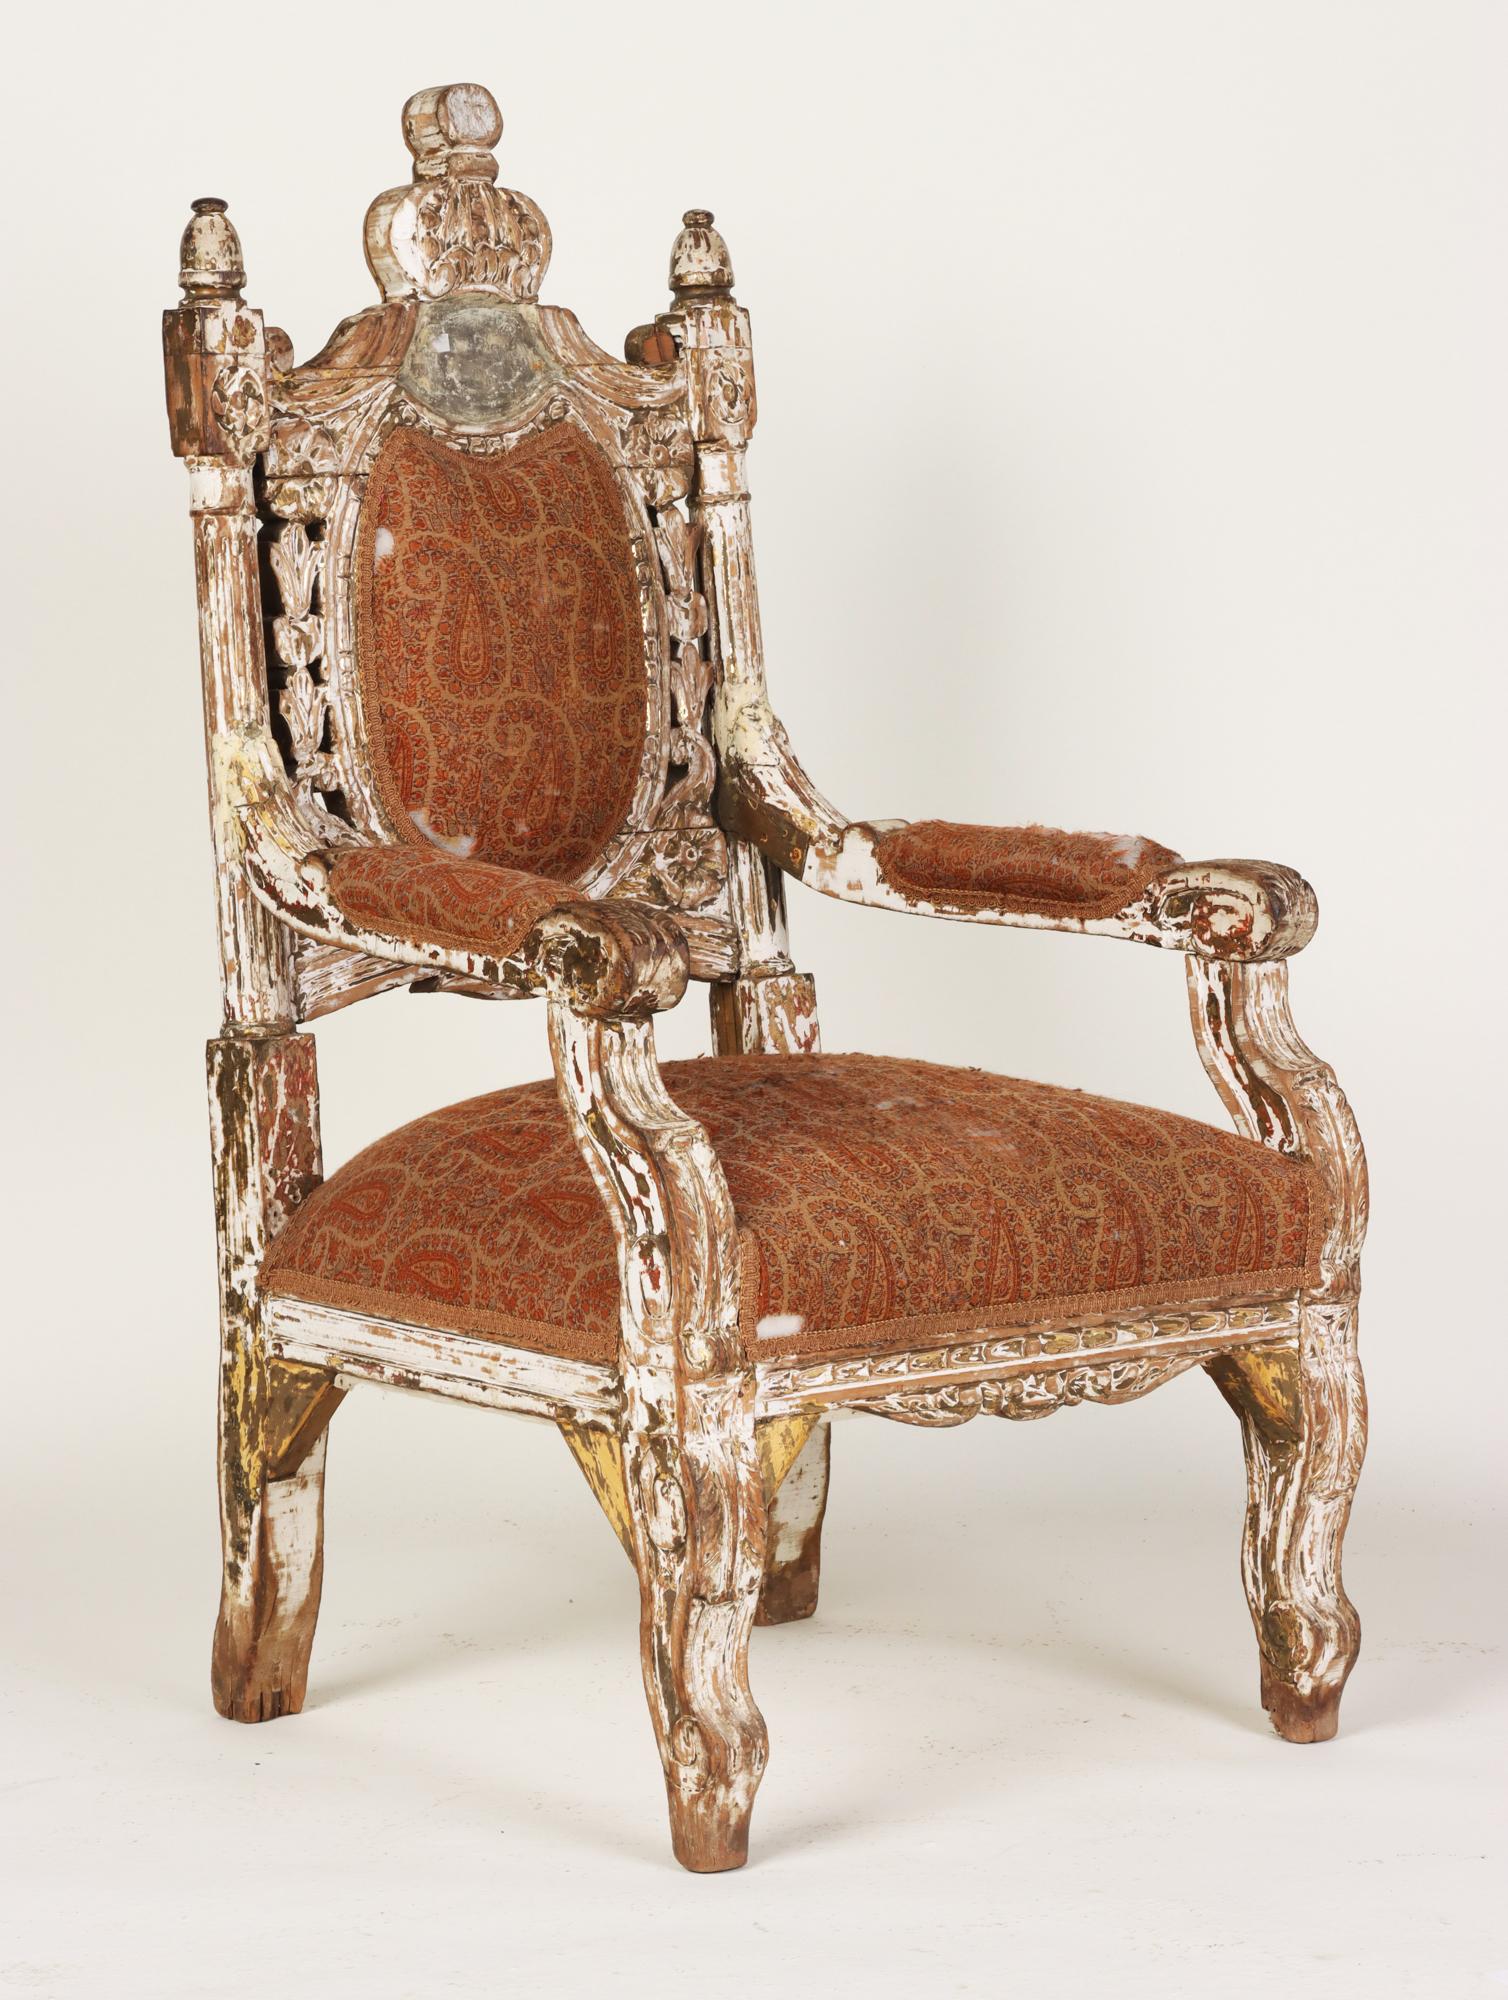 Pair of Monumental Italian Throne Style Carved Armchairs, Early 19th C In Good Condition For Sale In Philadelphia, PA